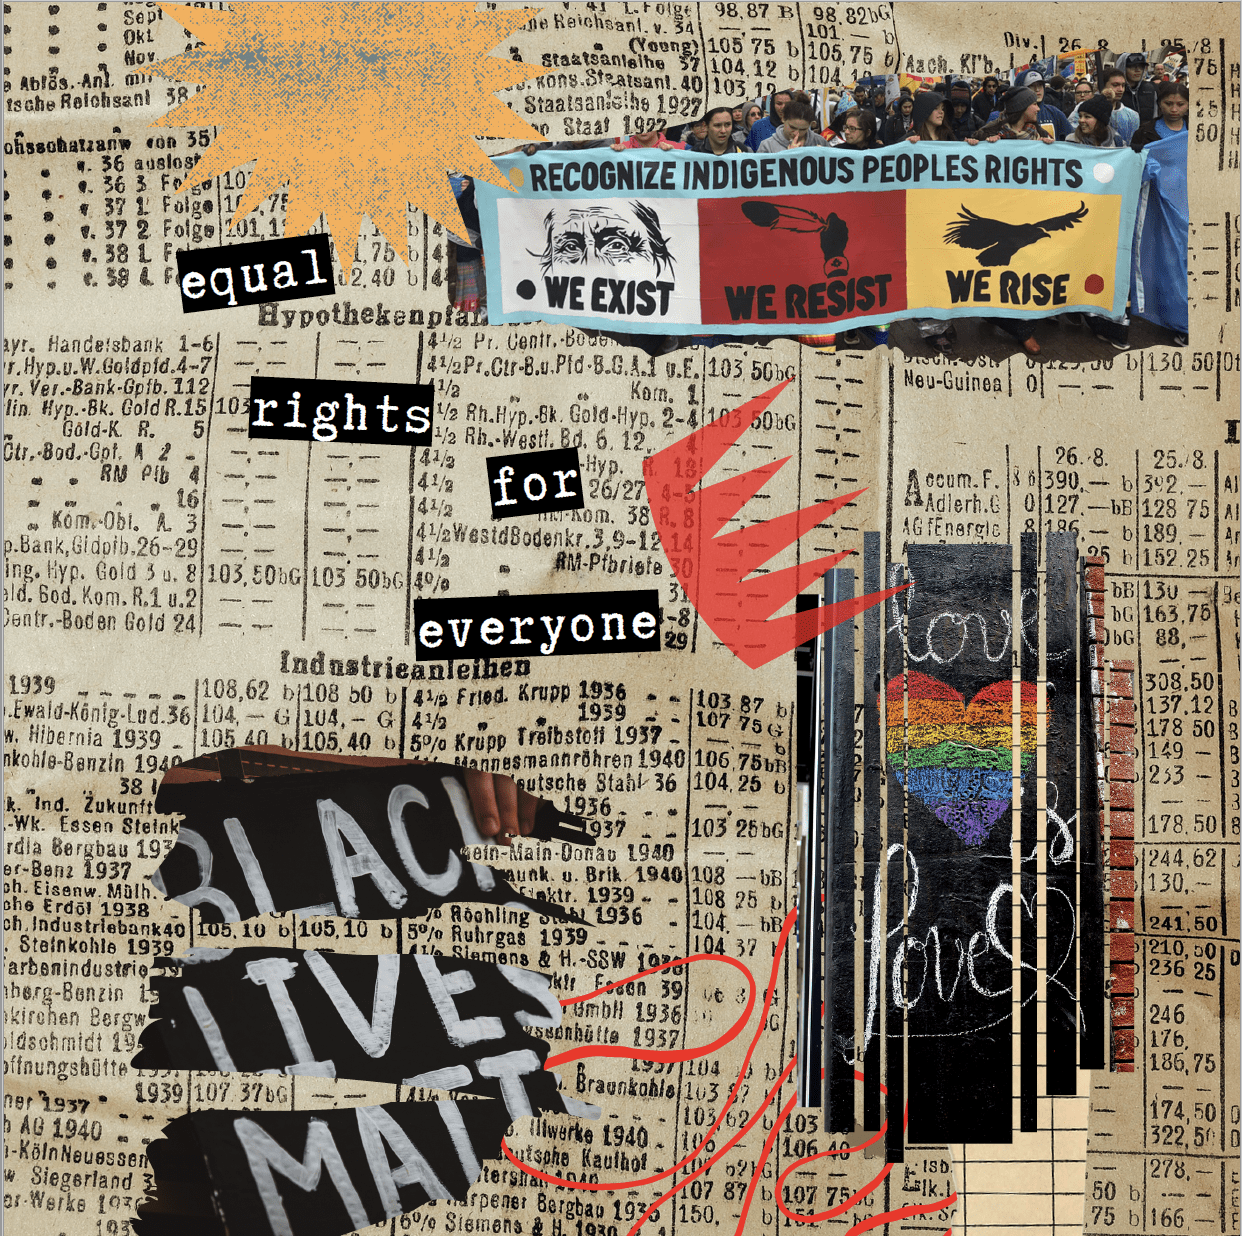 A collage with visuals of Black Lives Matter, Pride Protests, and Indigenous Rights Movements.